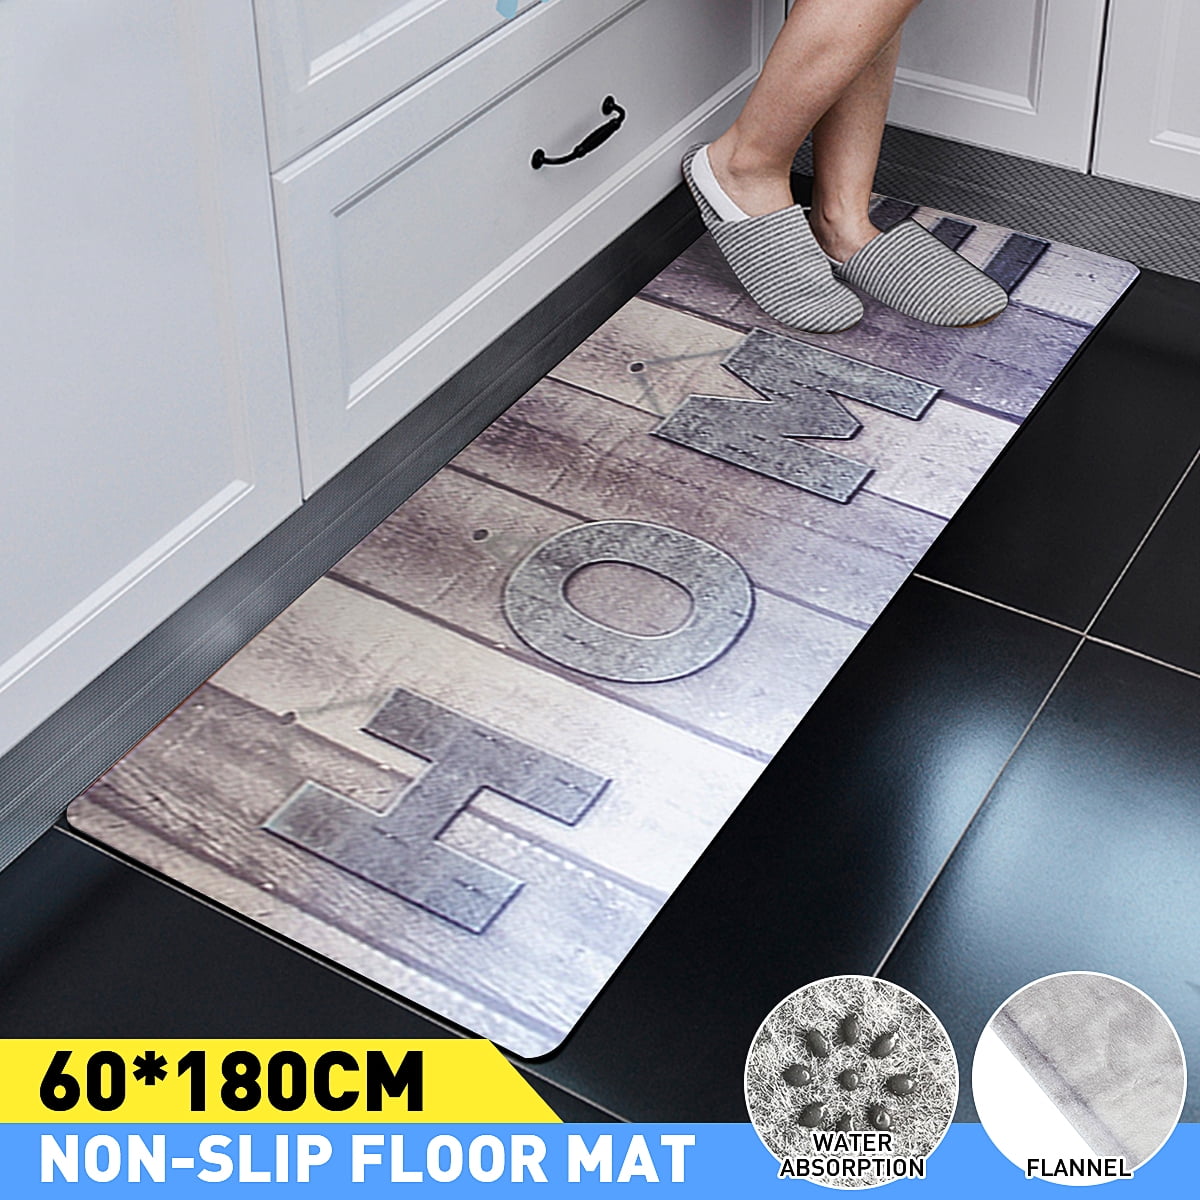 Extra Large Bathroom Carpet Non Slip Long Runner Rug Water Absorbent Washable 